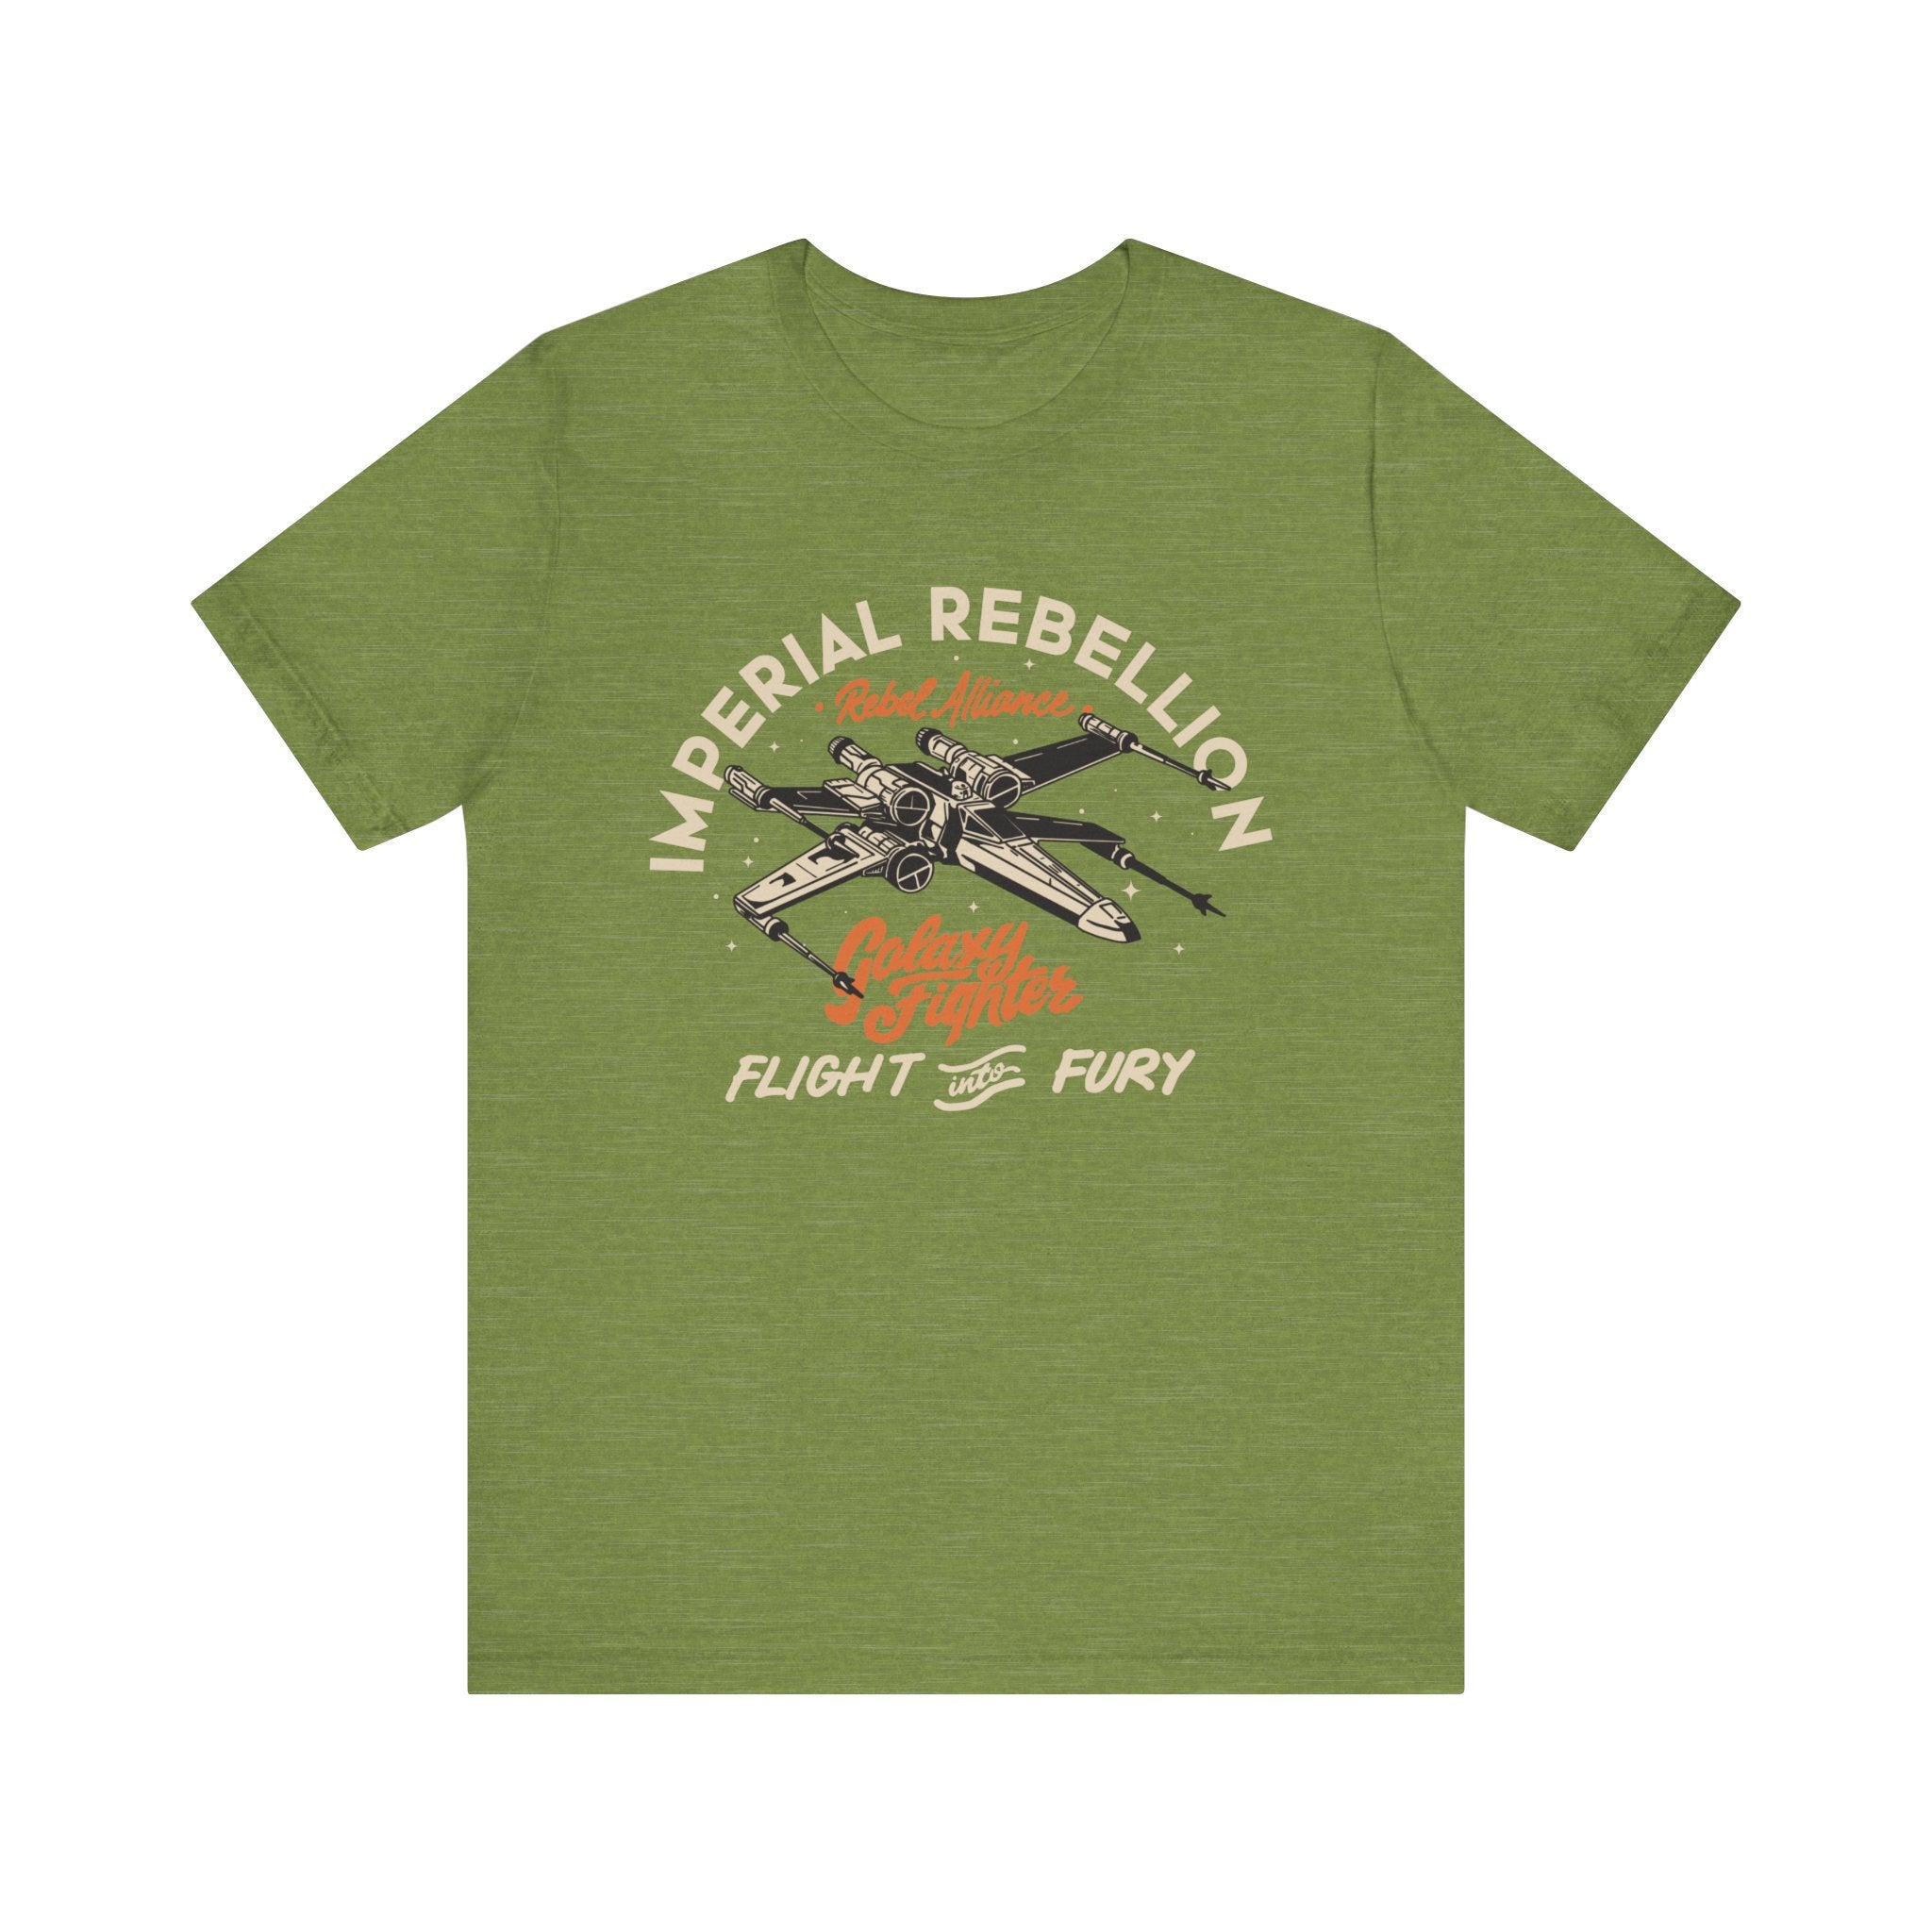 Olive green soft cotton Imperial Rebel T-Shirt with a graphic of vintage fighter planes and text that reads "Imperial Rebel T-Shirt, red hunter, pathway of fighter, flight fury," designed for a comfortable fit.